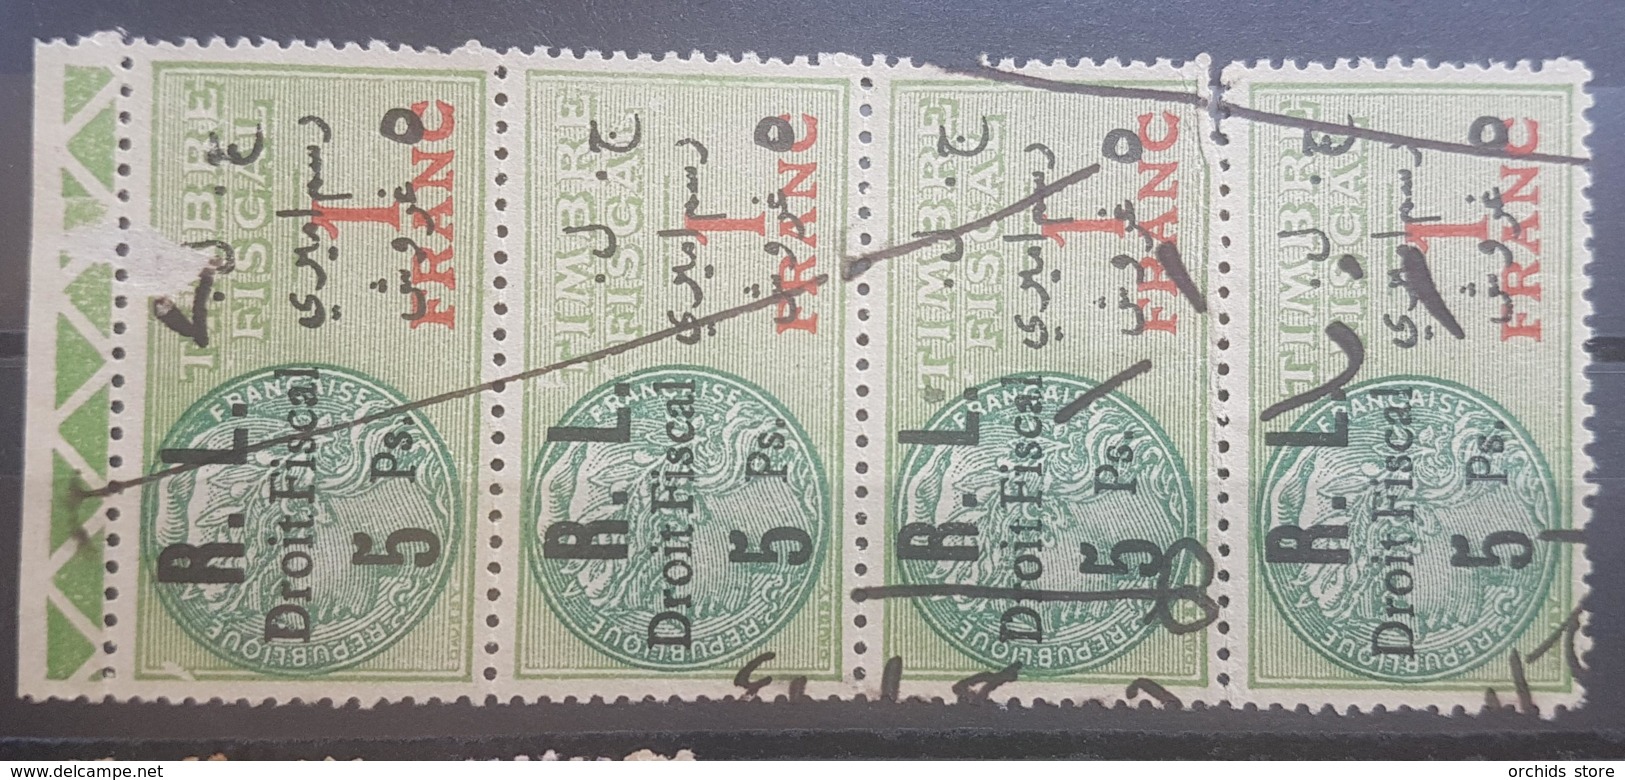 NO11 #49 - Lebanon 1927 5 Ps On 1f Green Fiscal Revenue Stamp, R & L Are Space Wider - Very Beautiful Blk/4 - Lebanon